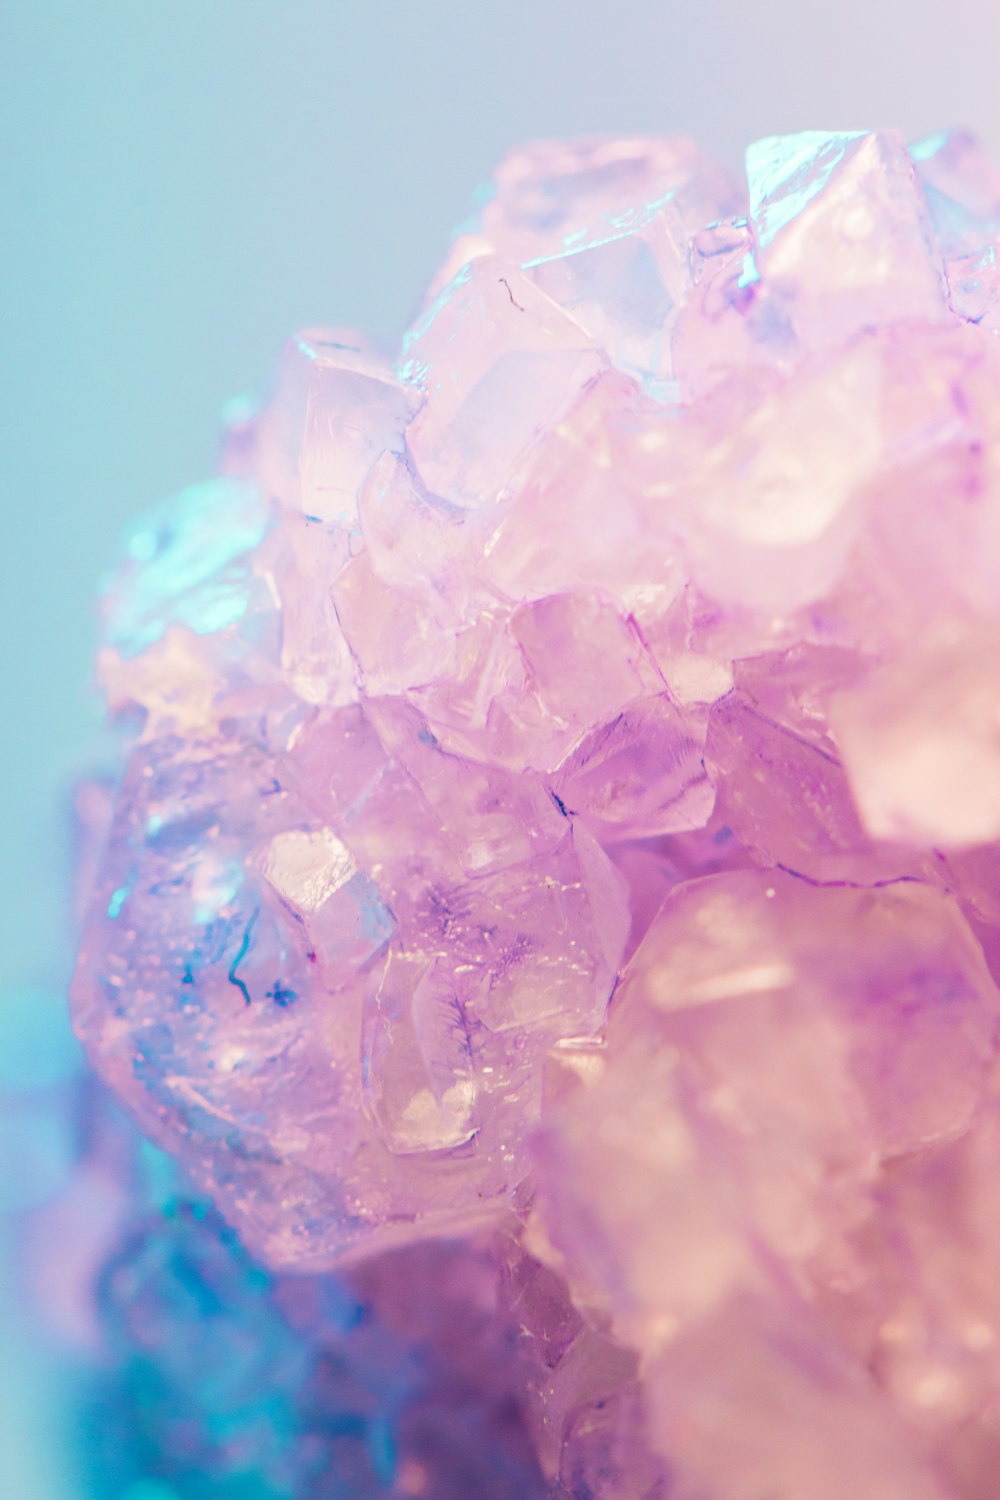 500+ Crystal Pictures [HD] | Download Free Images on Unsplash